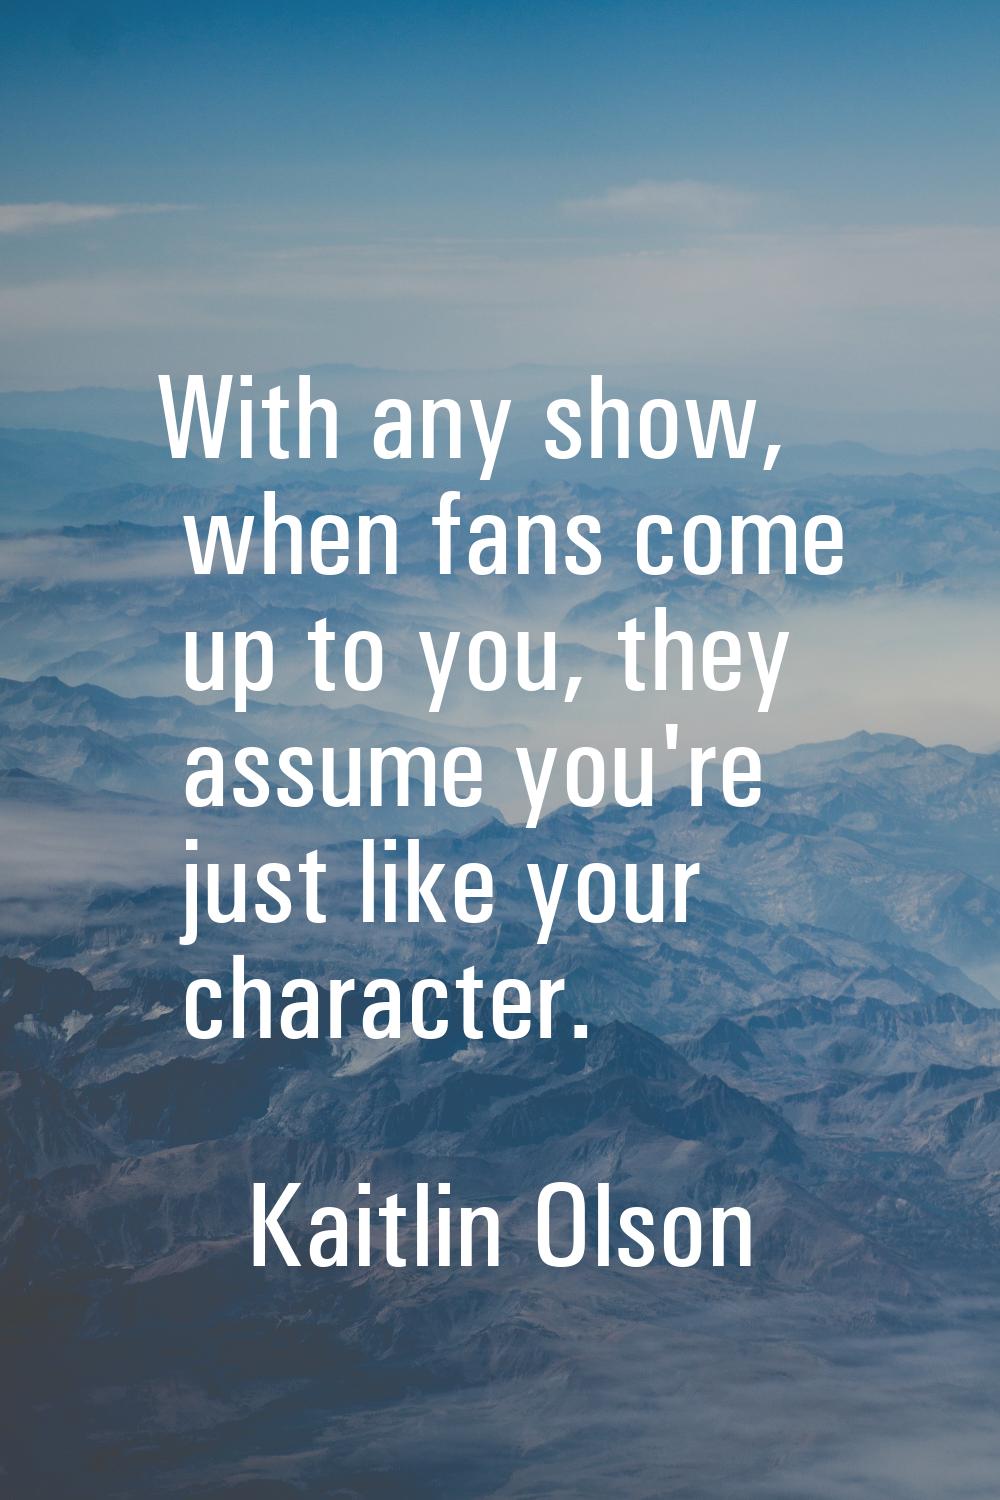 With any show, when fans come up to you, they assume you're just like your character.